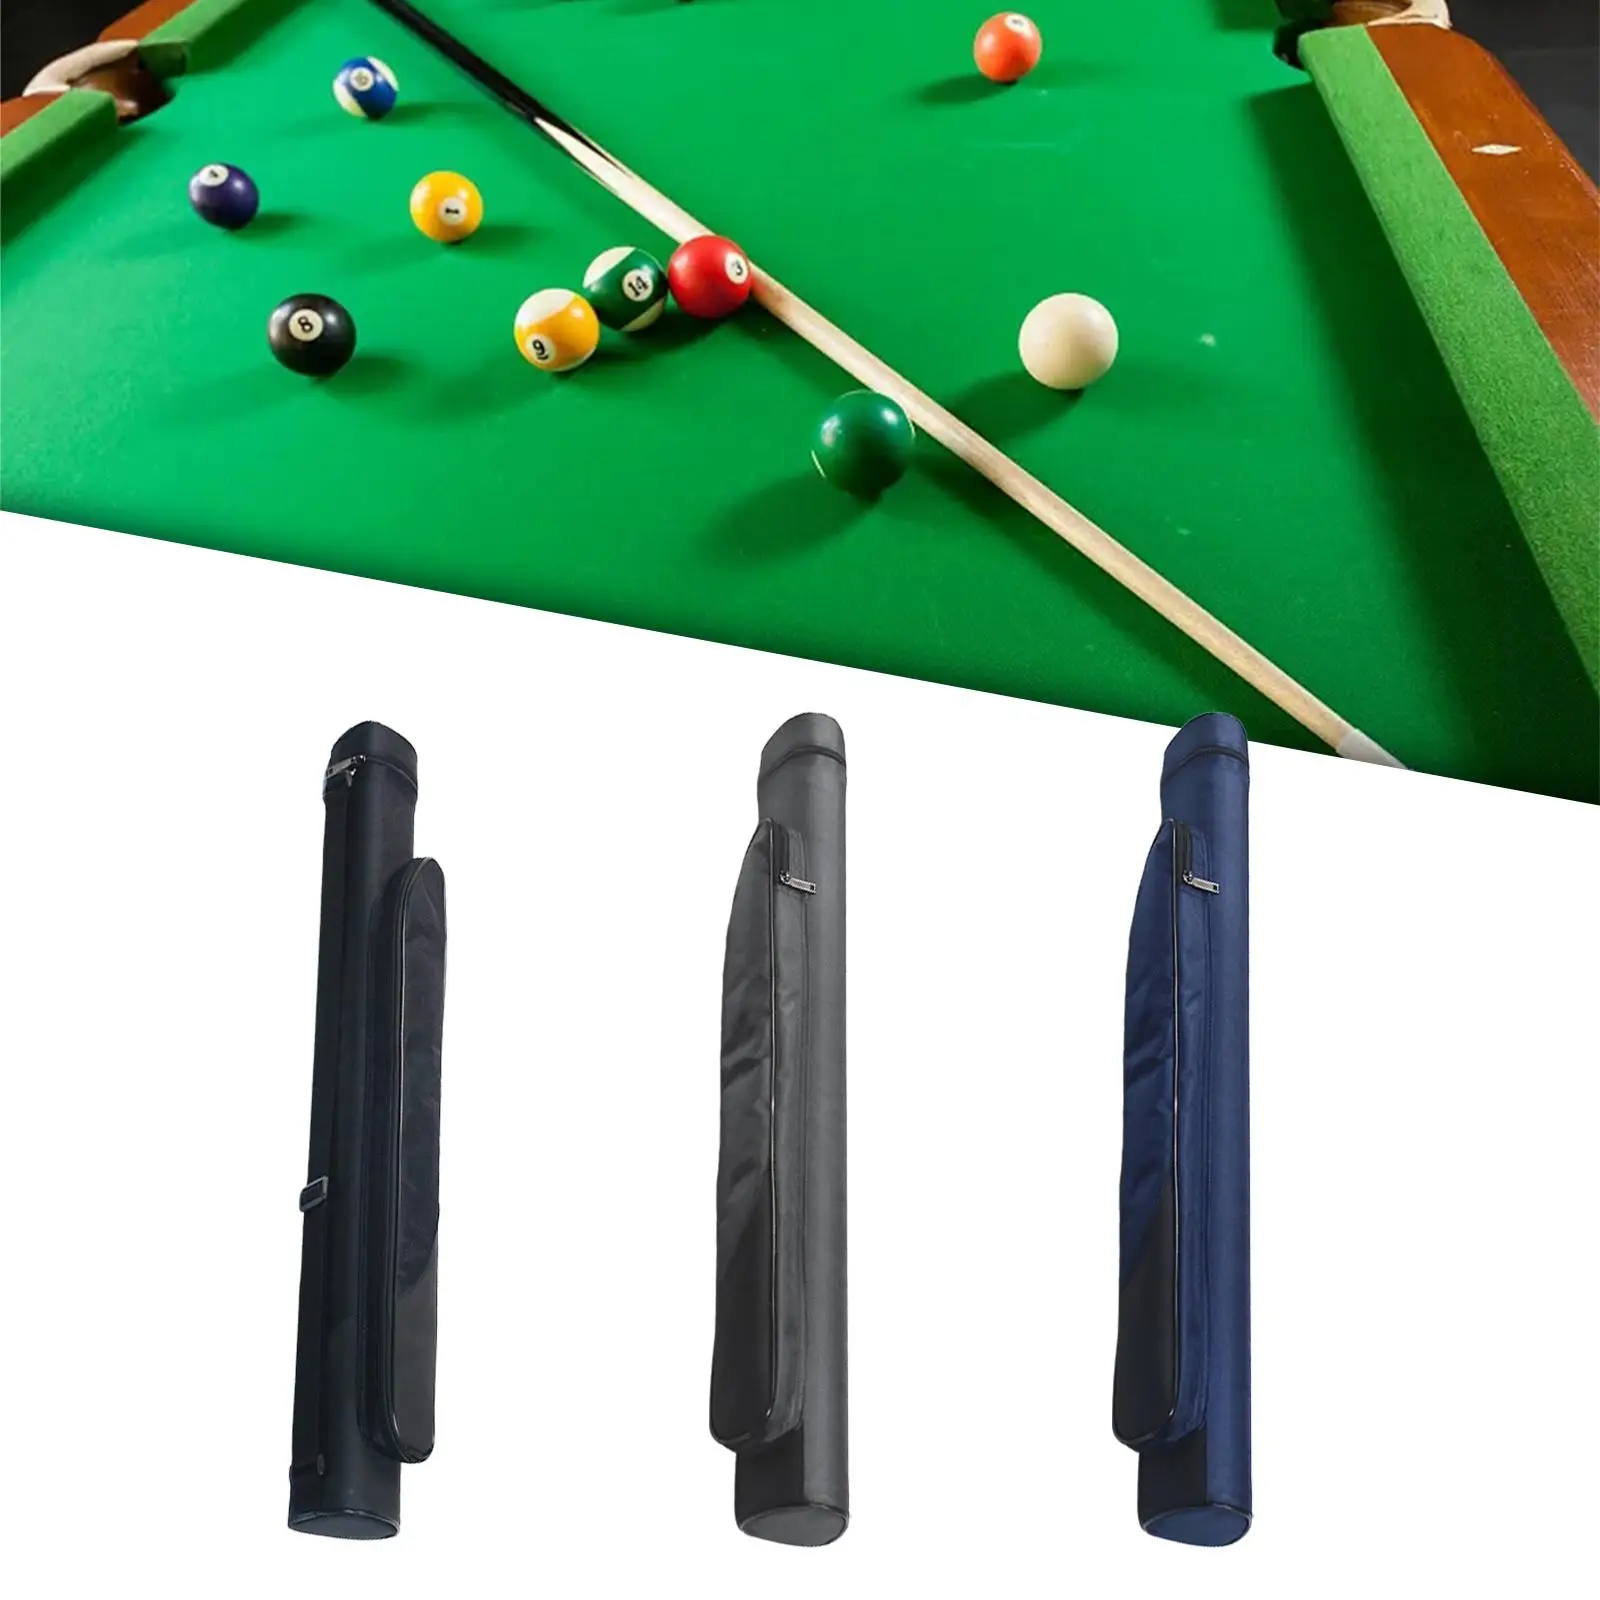 Billiard Pool Cue Carrying Bag Pool Cue of Case with Side Pockets Container